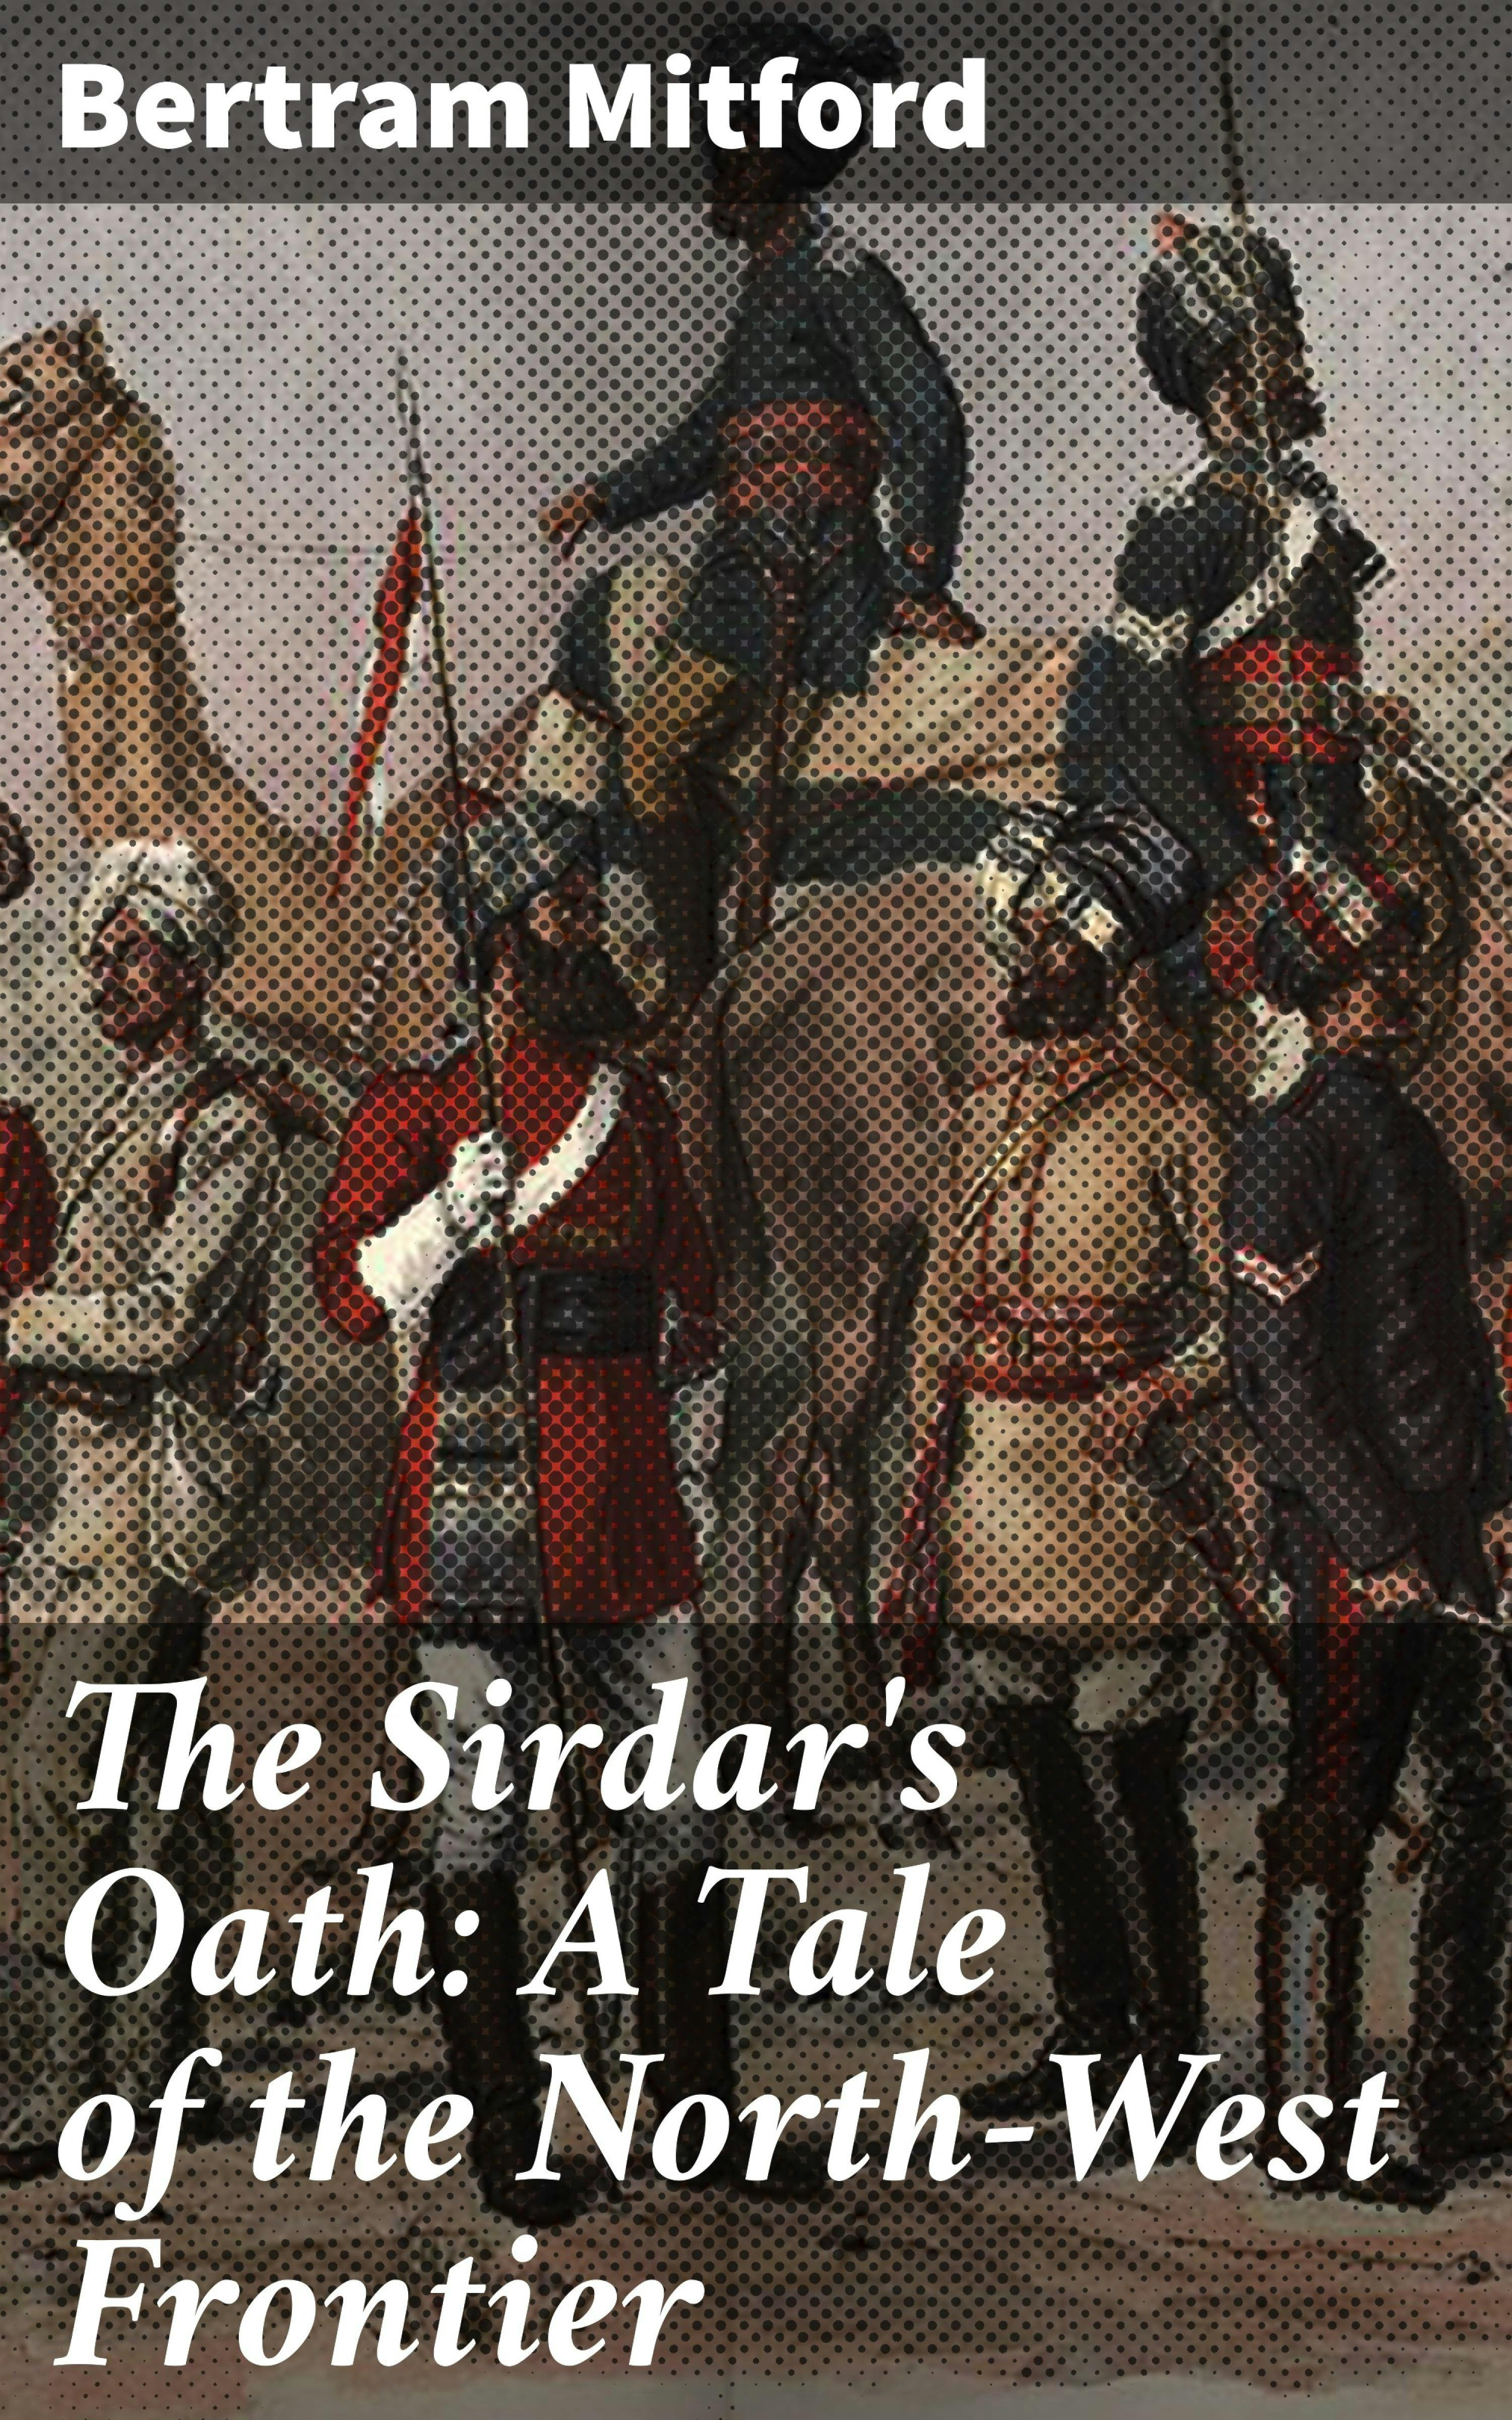 The Sirdar's Oath: A Tale of the North-West Frontier - Bertram Mitford